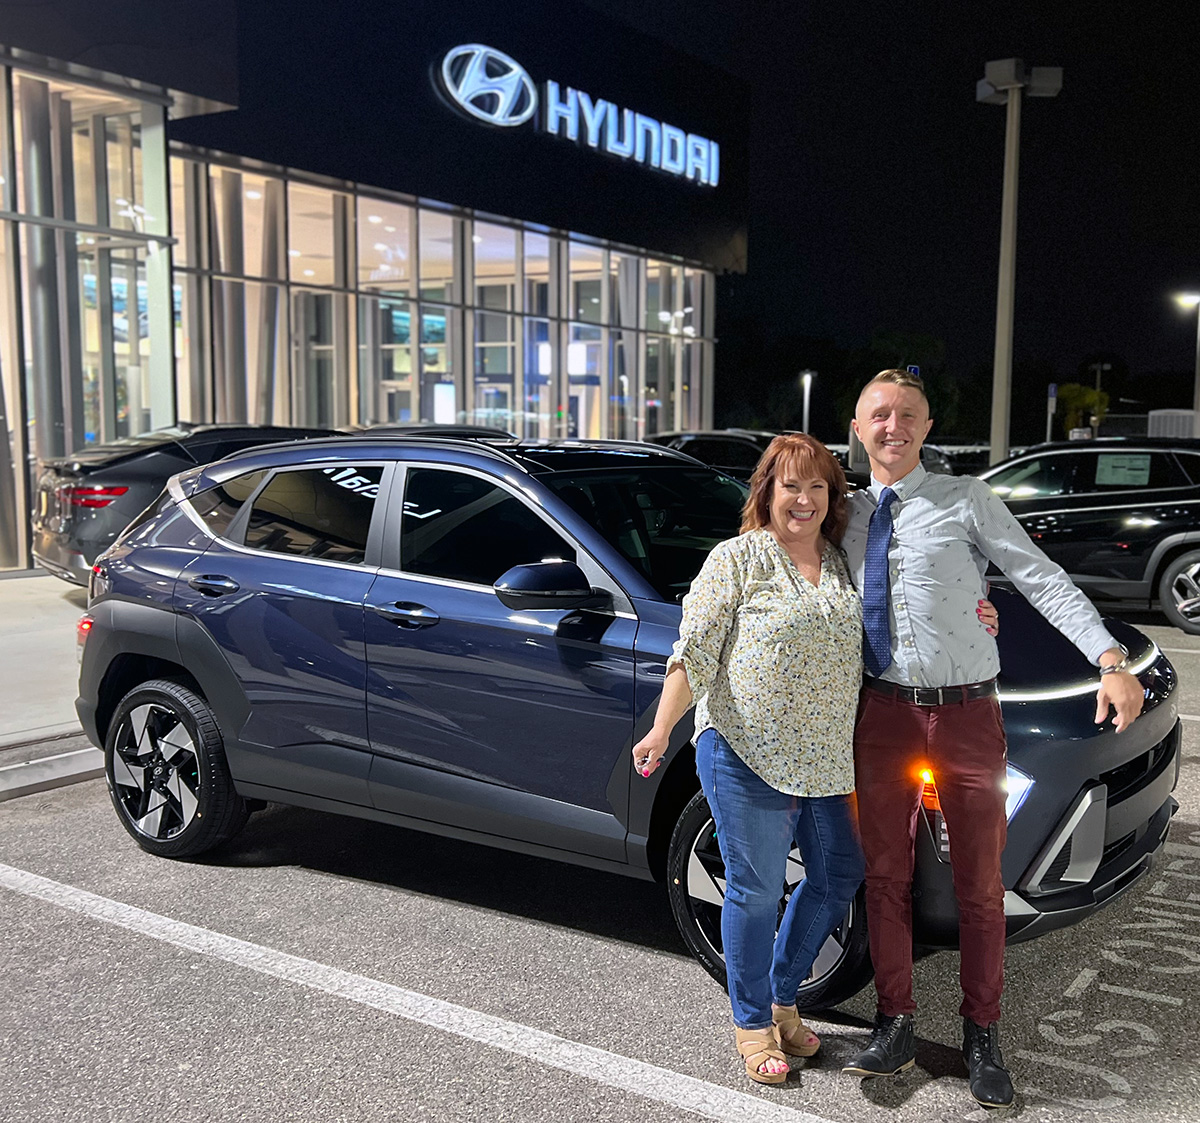 Getting a #NewSUV is a reason to #GetExcited like Marybeth Brown who came to #LakelandHyundai when salesperson #HaizeFassett showed all the #Options & the #2024Kona that was the #PerfectOne - #Congratulations Marybeth - #ThankYou & #Enjoy - we're here for you! #GreatService